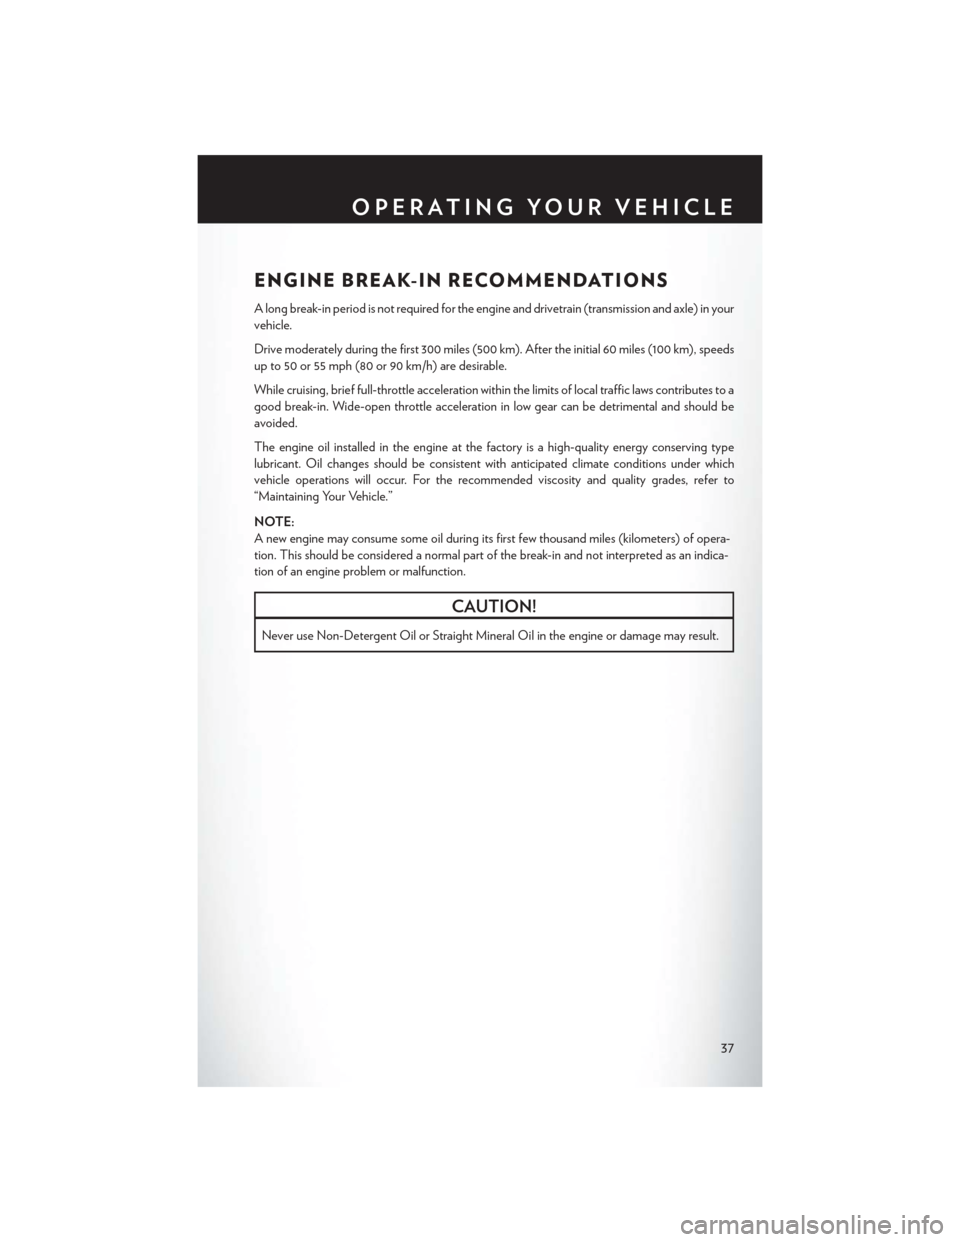 CHRYSLER TOWN AND COUNTRY 2015 5.G User Guide ENGINE BREAK-IN RECOMMENDATIONS
Alongbreak-inperiodisnotrequiredfortheengineanddrivetrain(transmissionandaxle)inyour
vehicle.
Drive moderately during the first 300 miles (500 km). After the initial 60